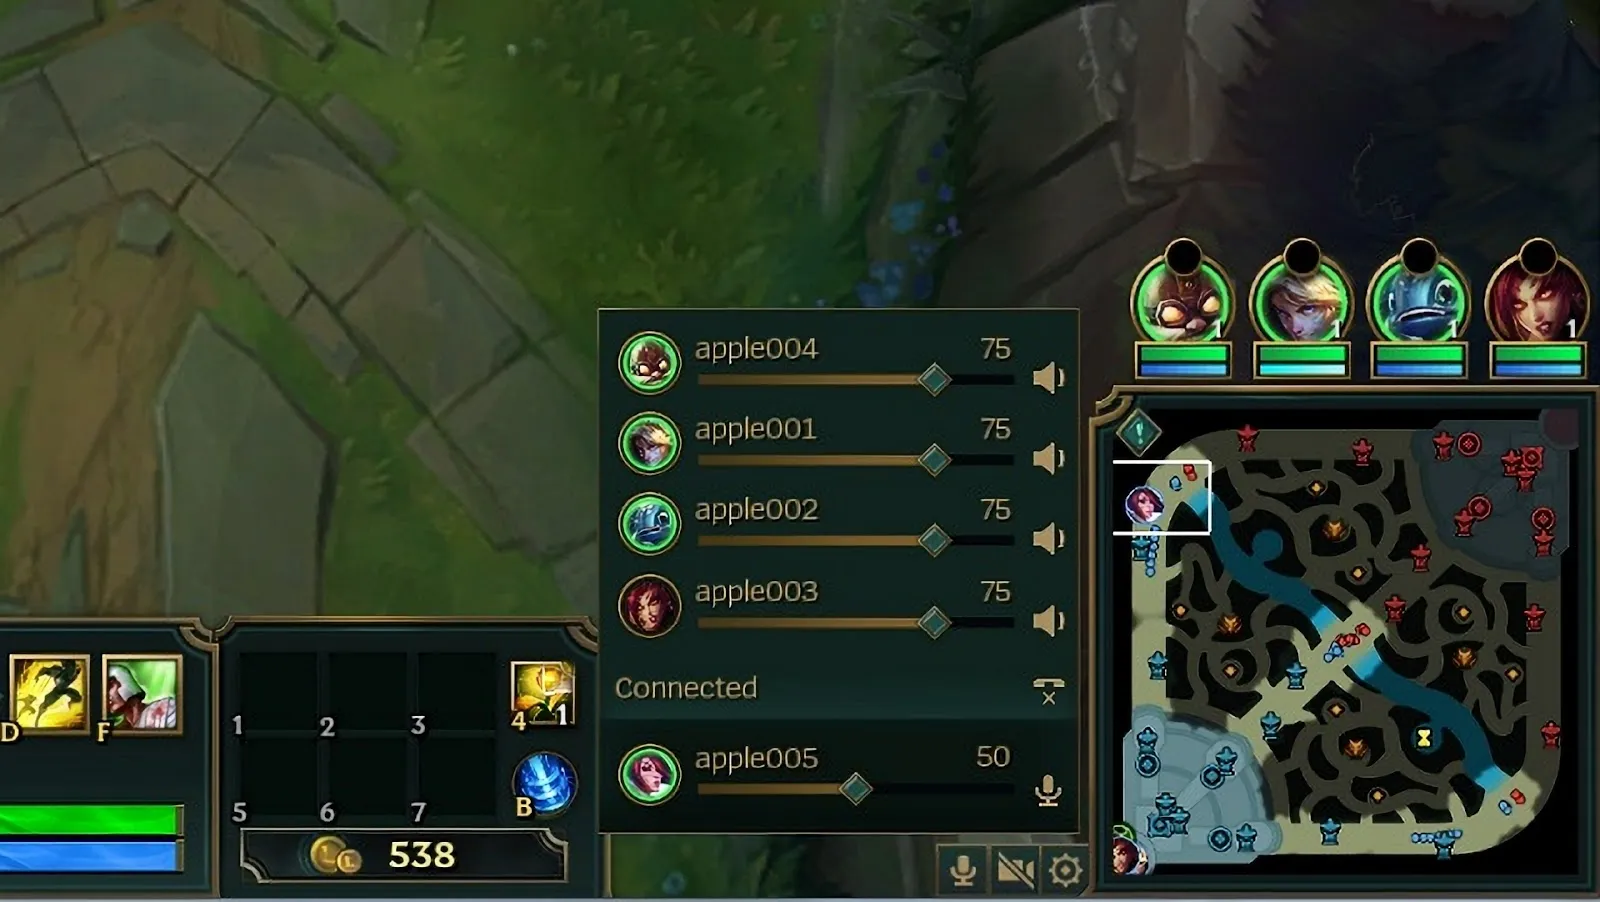 League of Legends - Voice Chat In-game